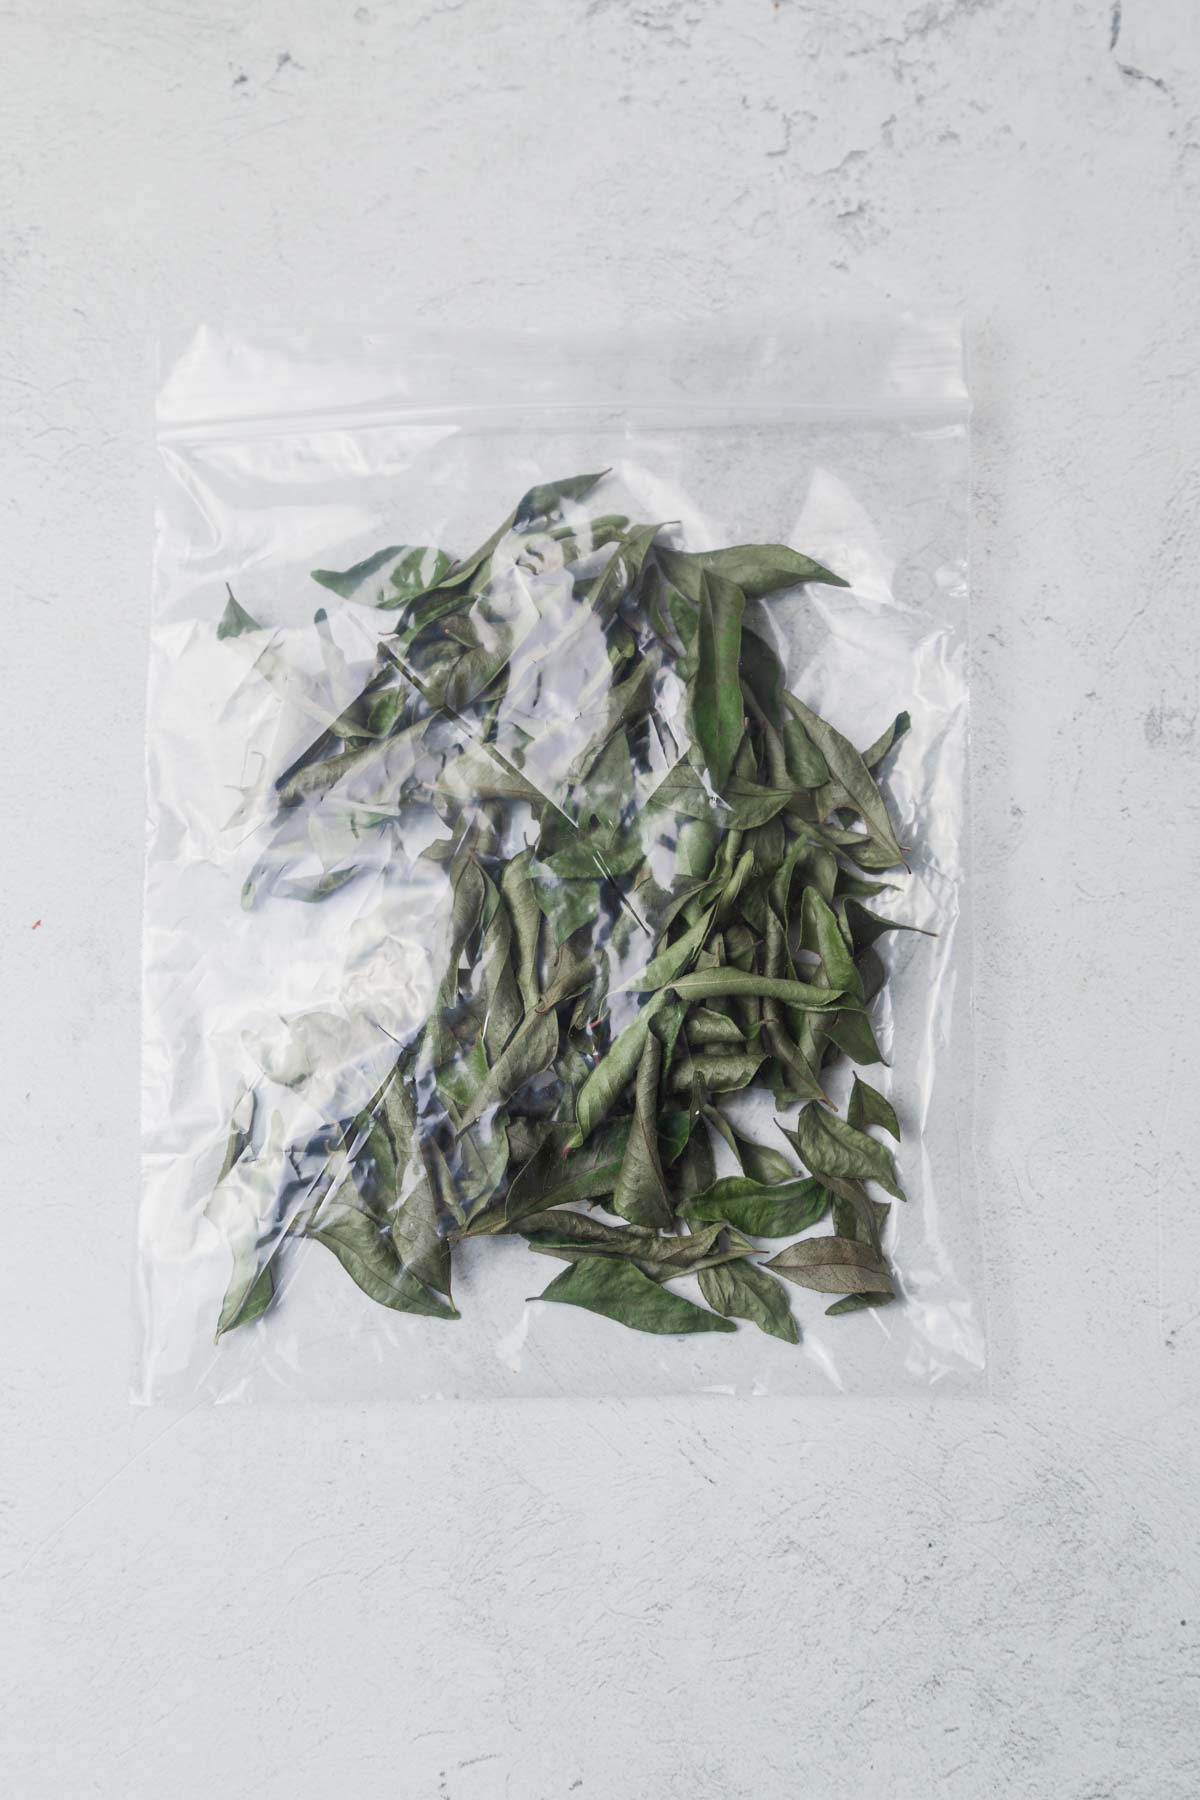 frozen curry leaves in a plastic bag.